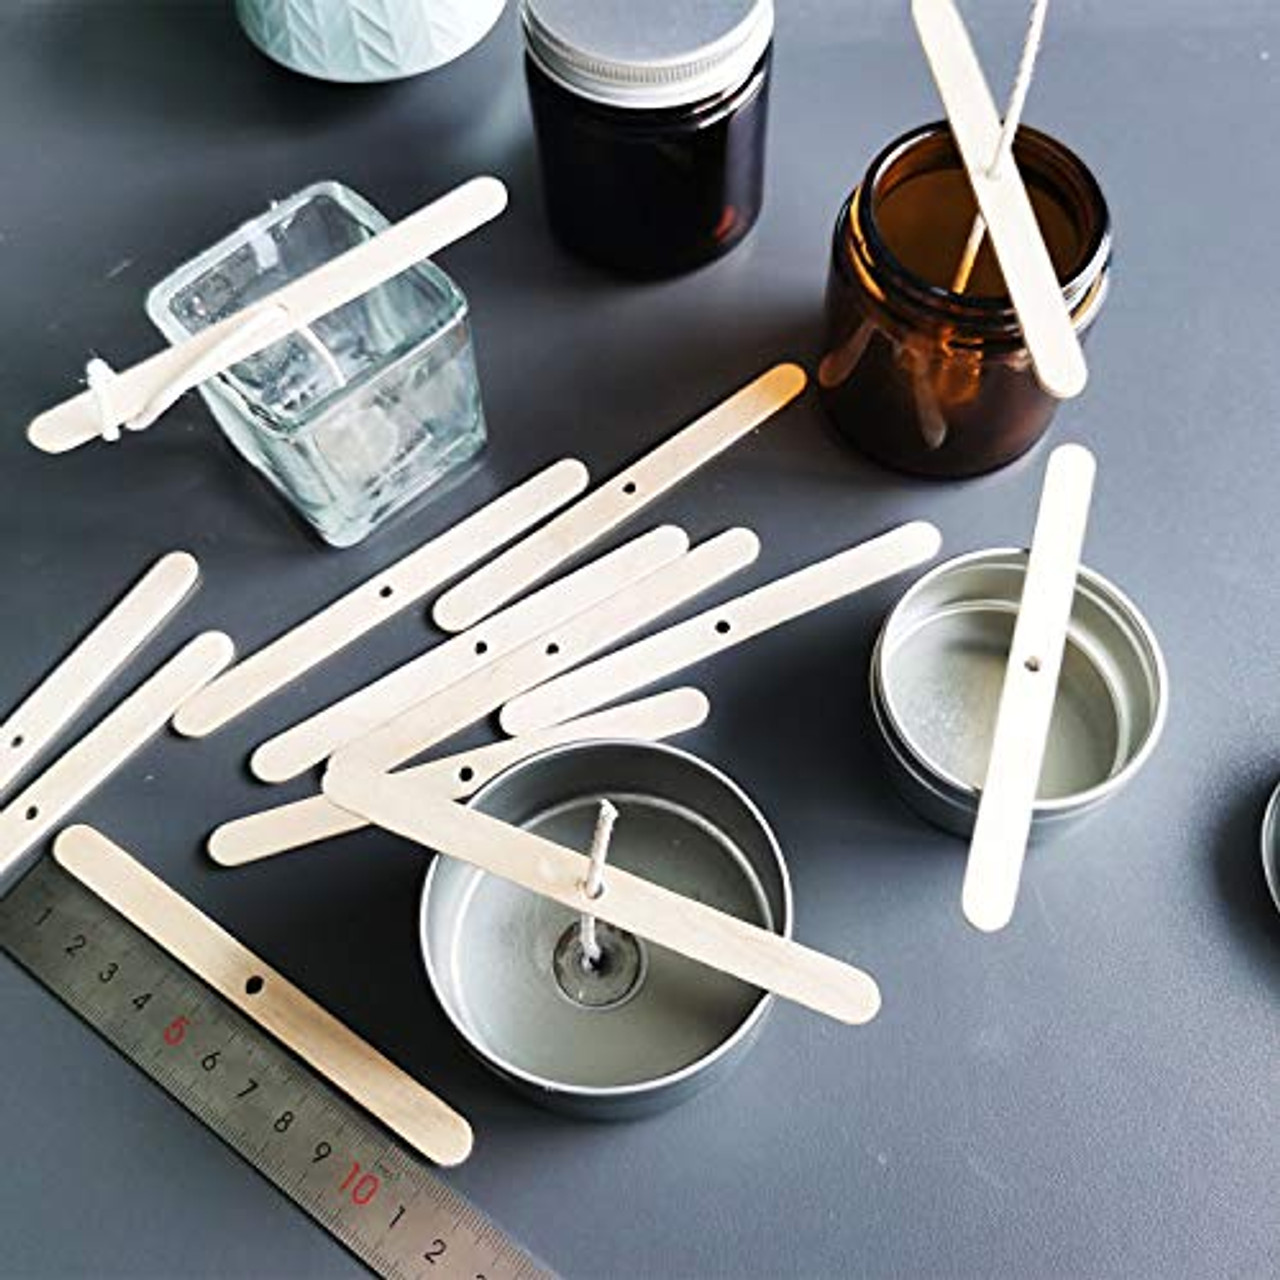 Candle Wick Kit, 150pcs Candle Wicks, Candle Wick Stickers 150pcs and  Candle Wick Centering Device 1 pcs, Candle Making Supplies for Candle  Making